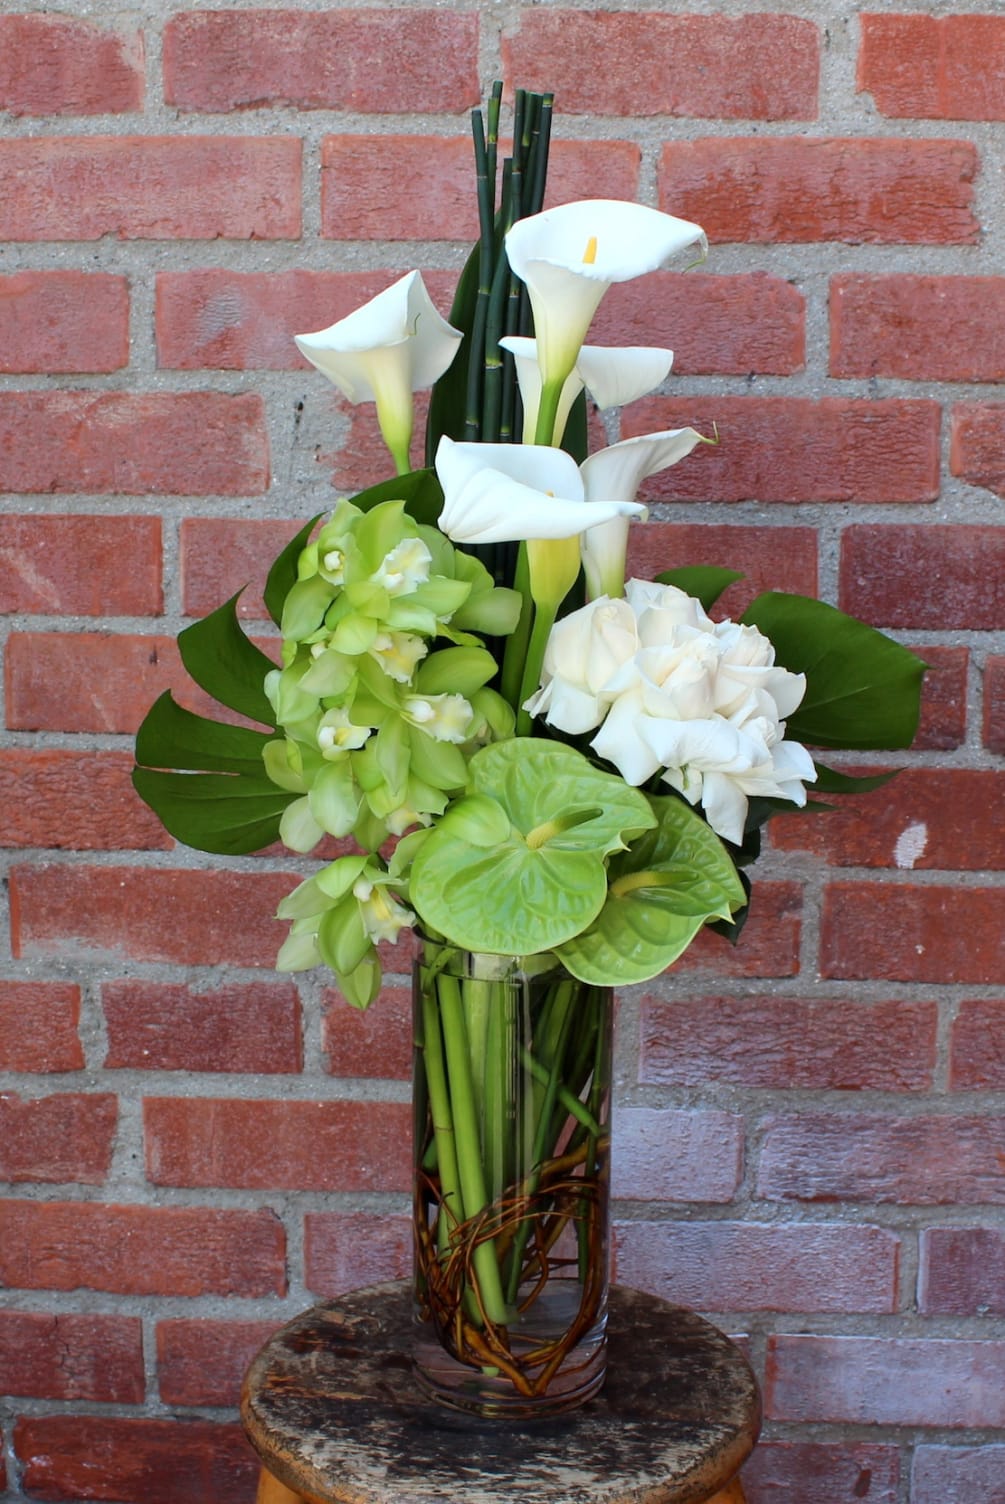 Splendid arrangement with orchids, lilies and roses in a glass vase. 